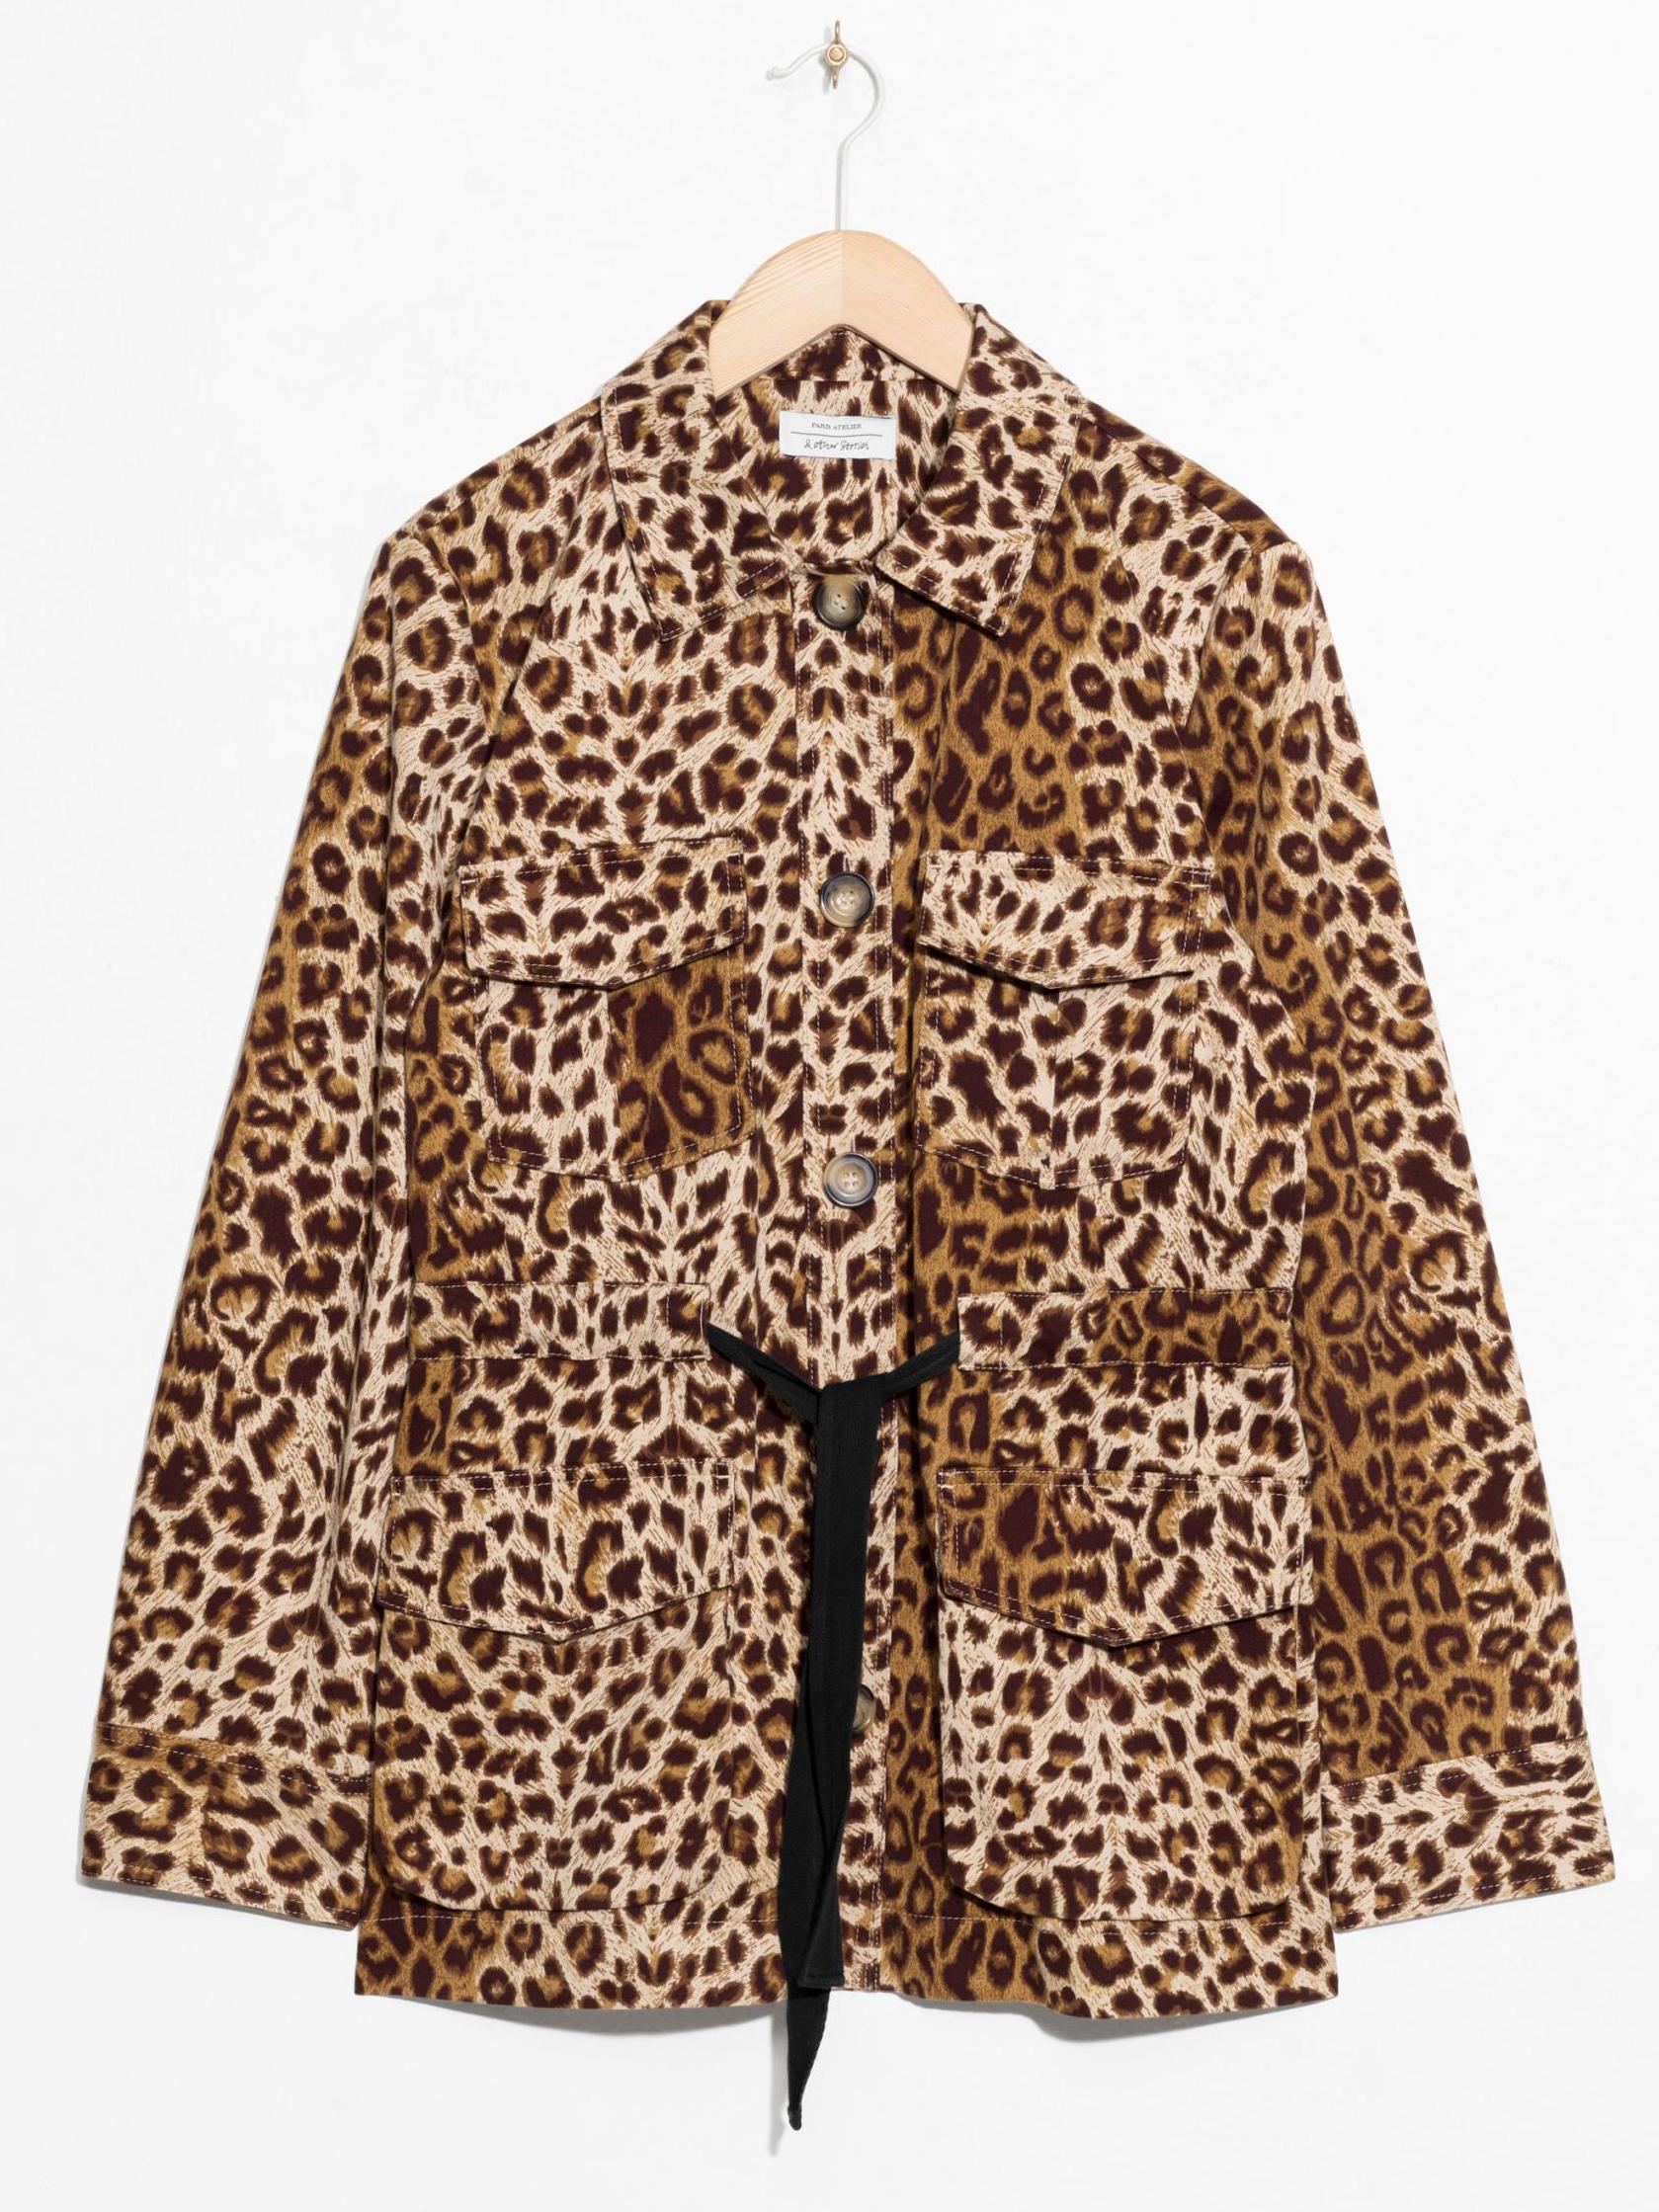 Your guide to autumn's leopard print trend and how to…